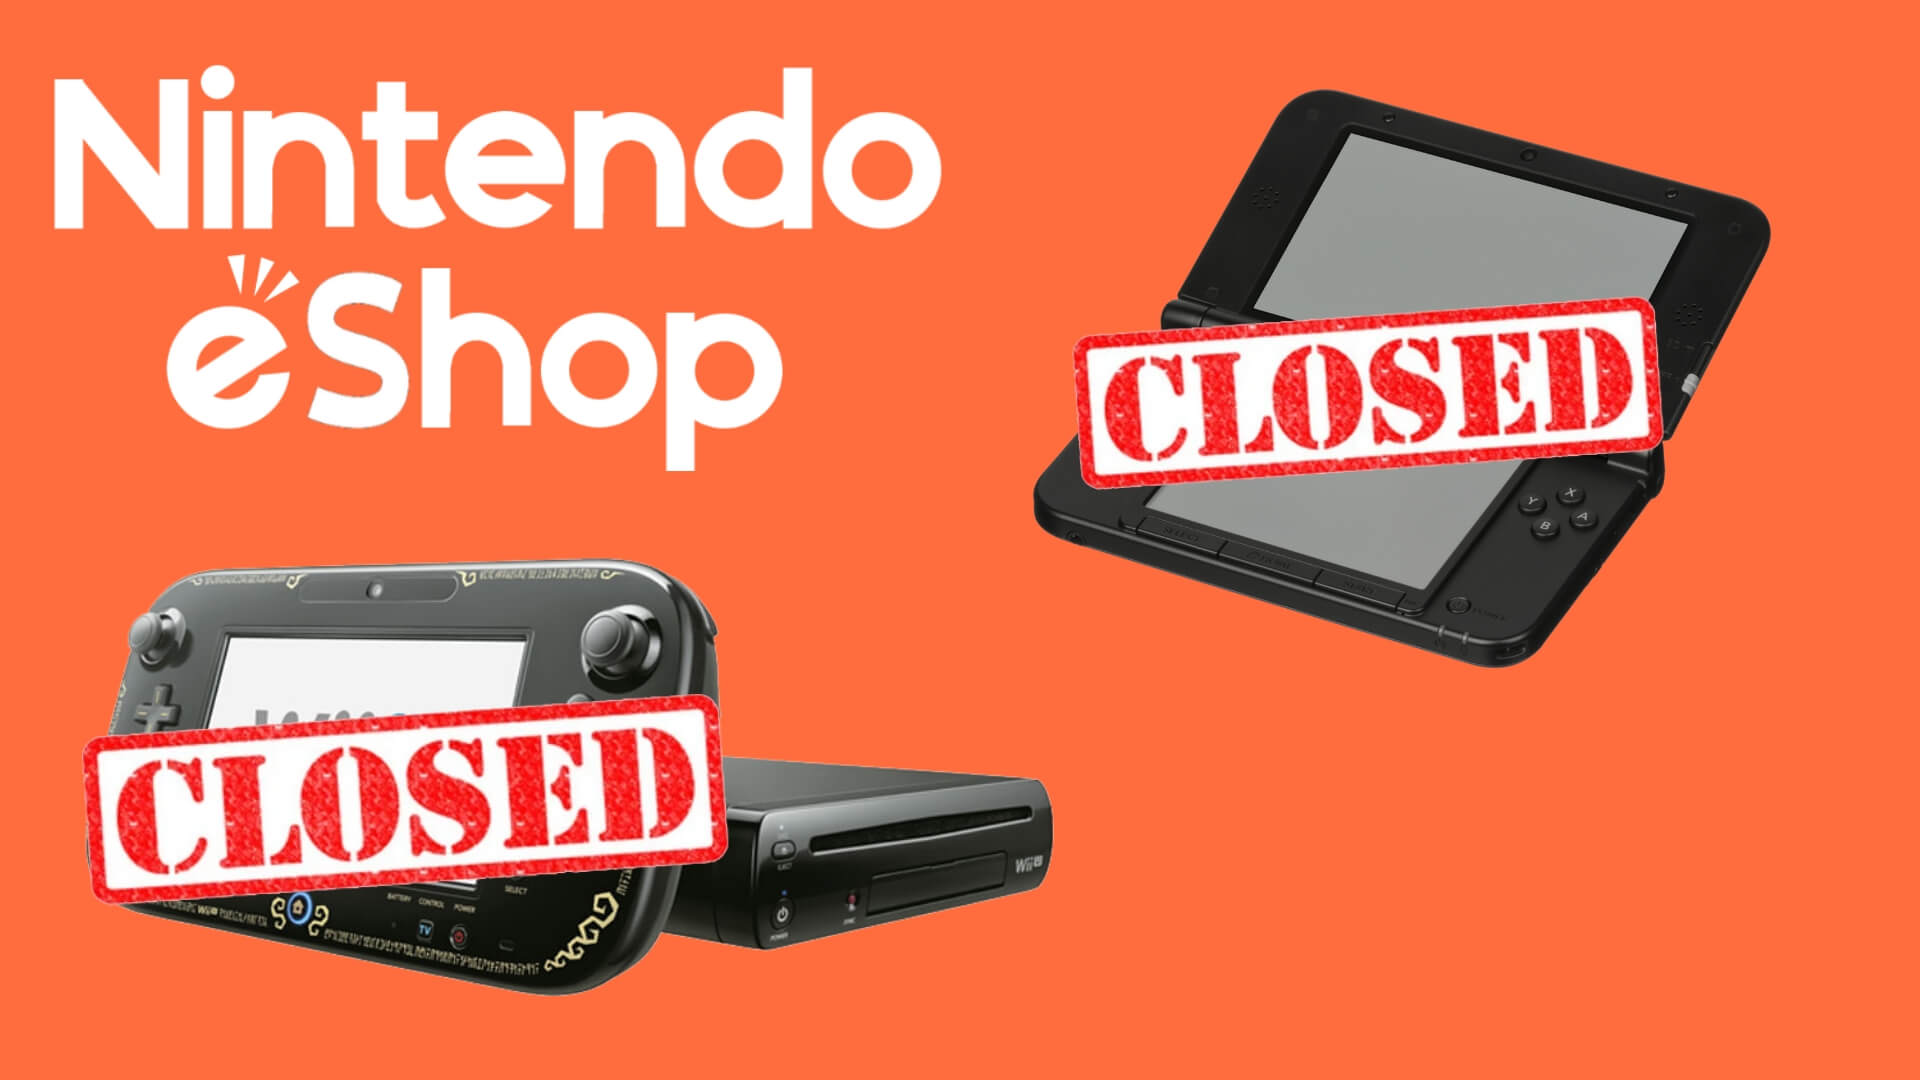 RIP, 3DS and Wii U